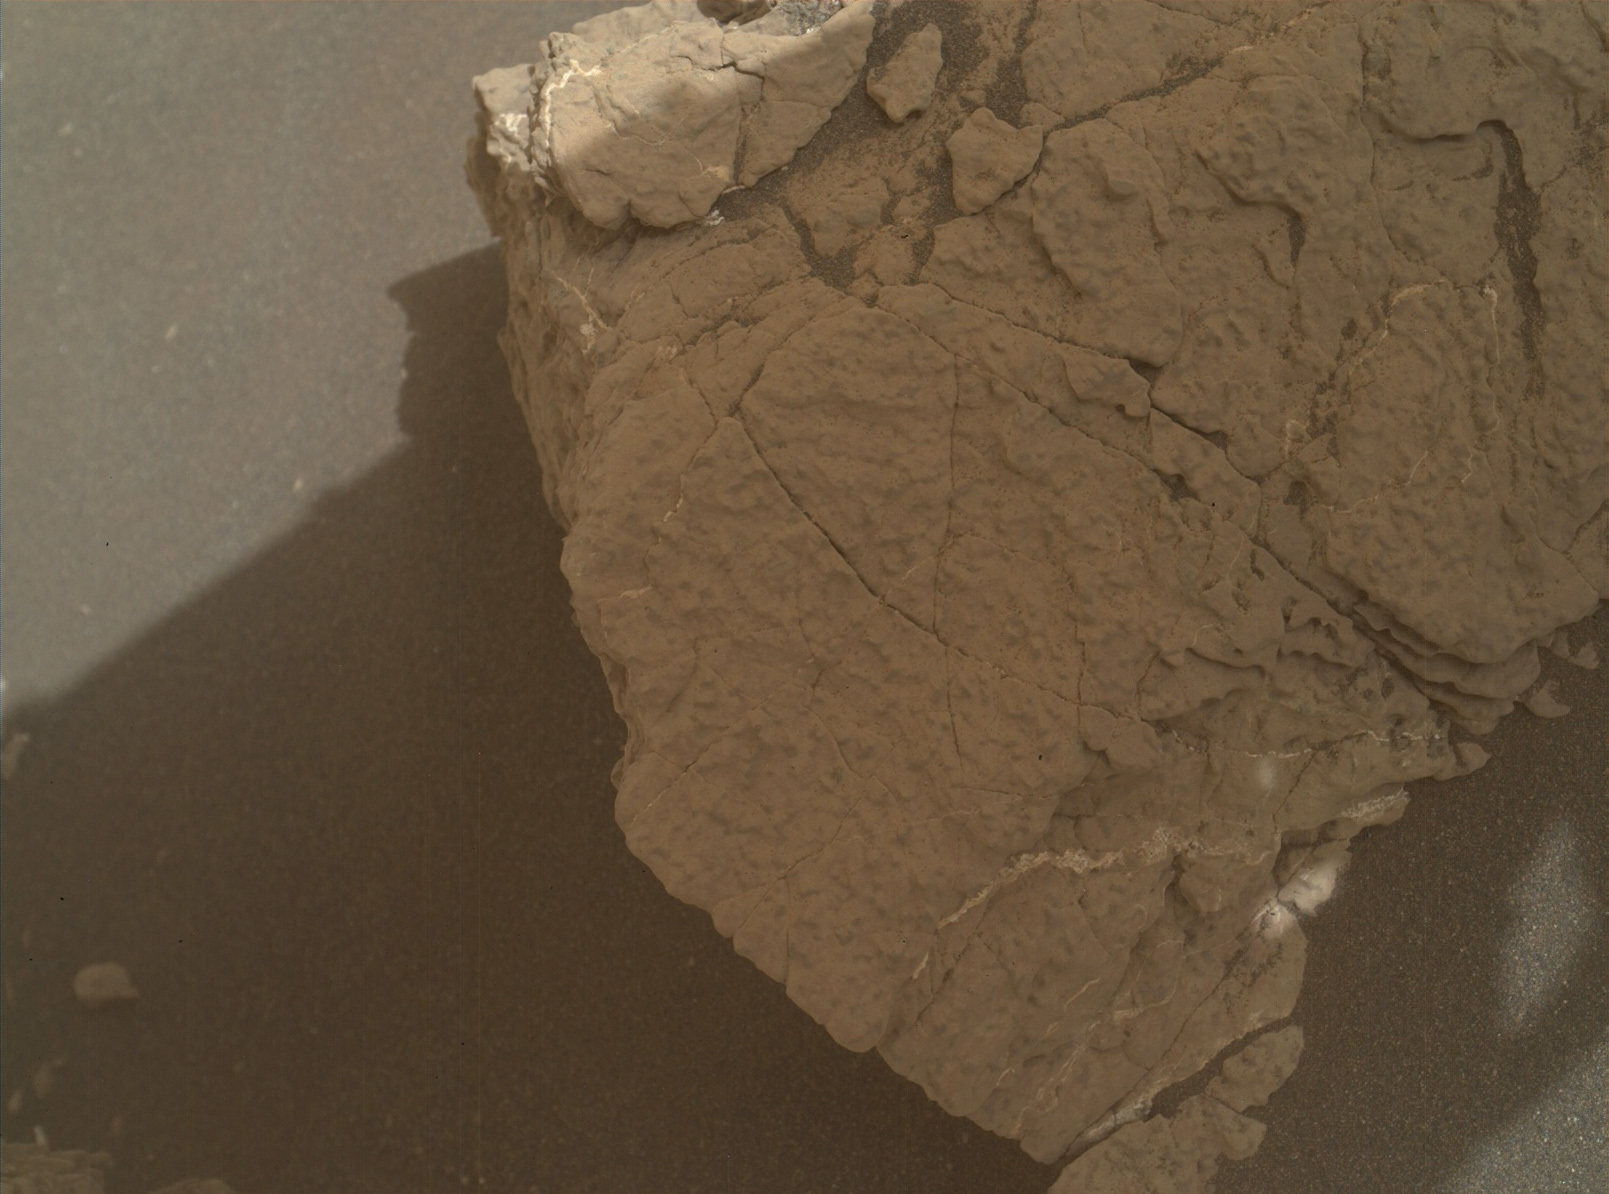 A color image of Mars taken by the Mars Hand Lens Imager on NASA's Curiosity.